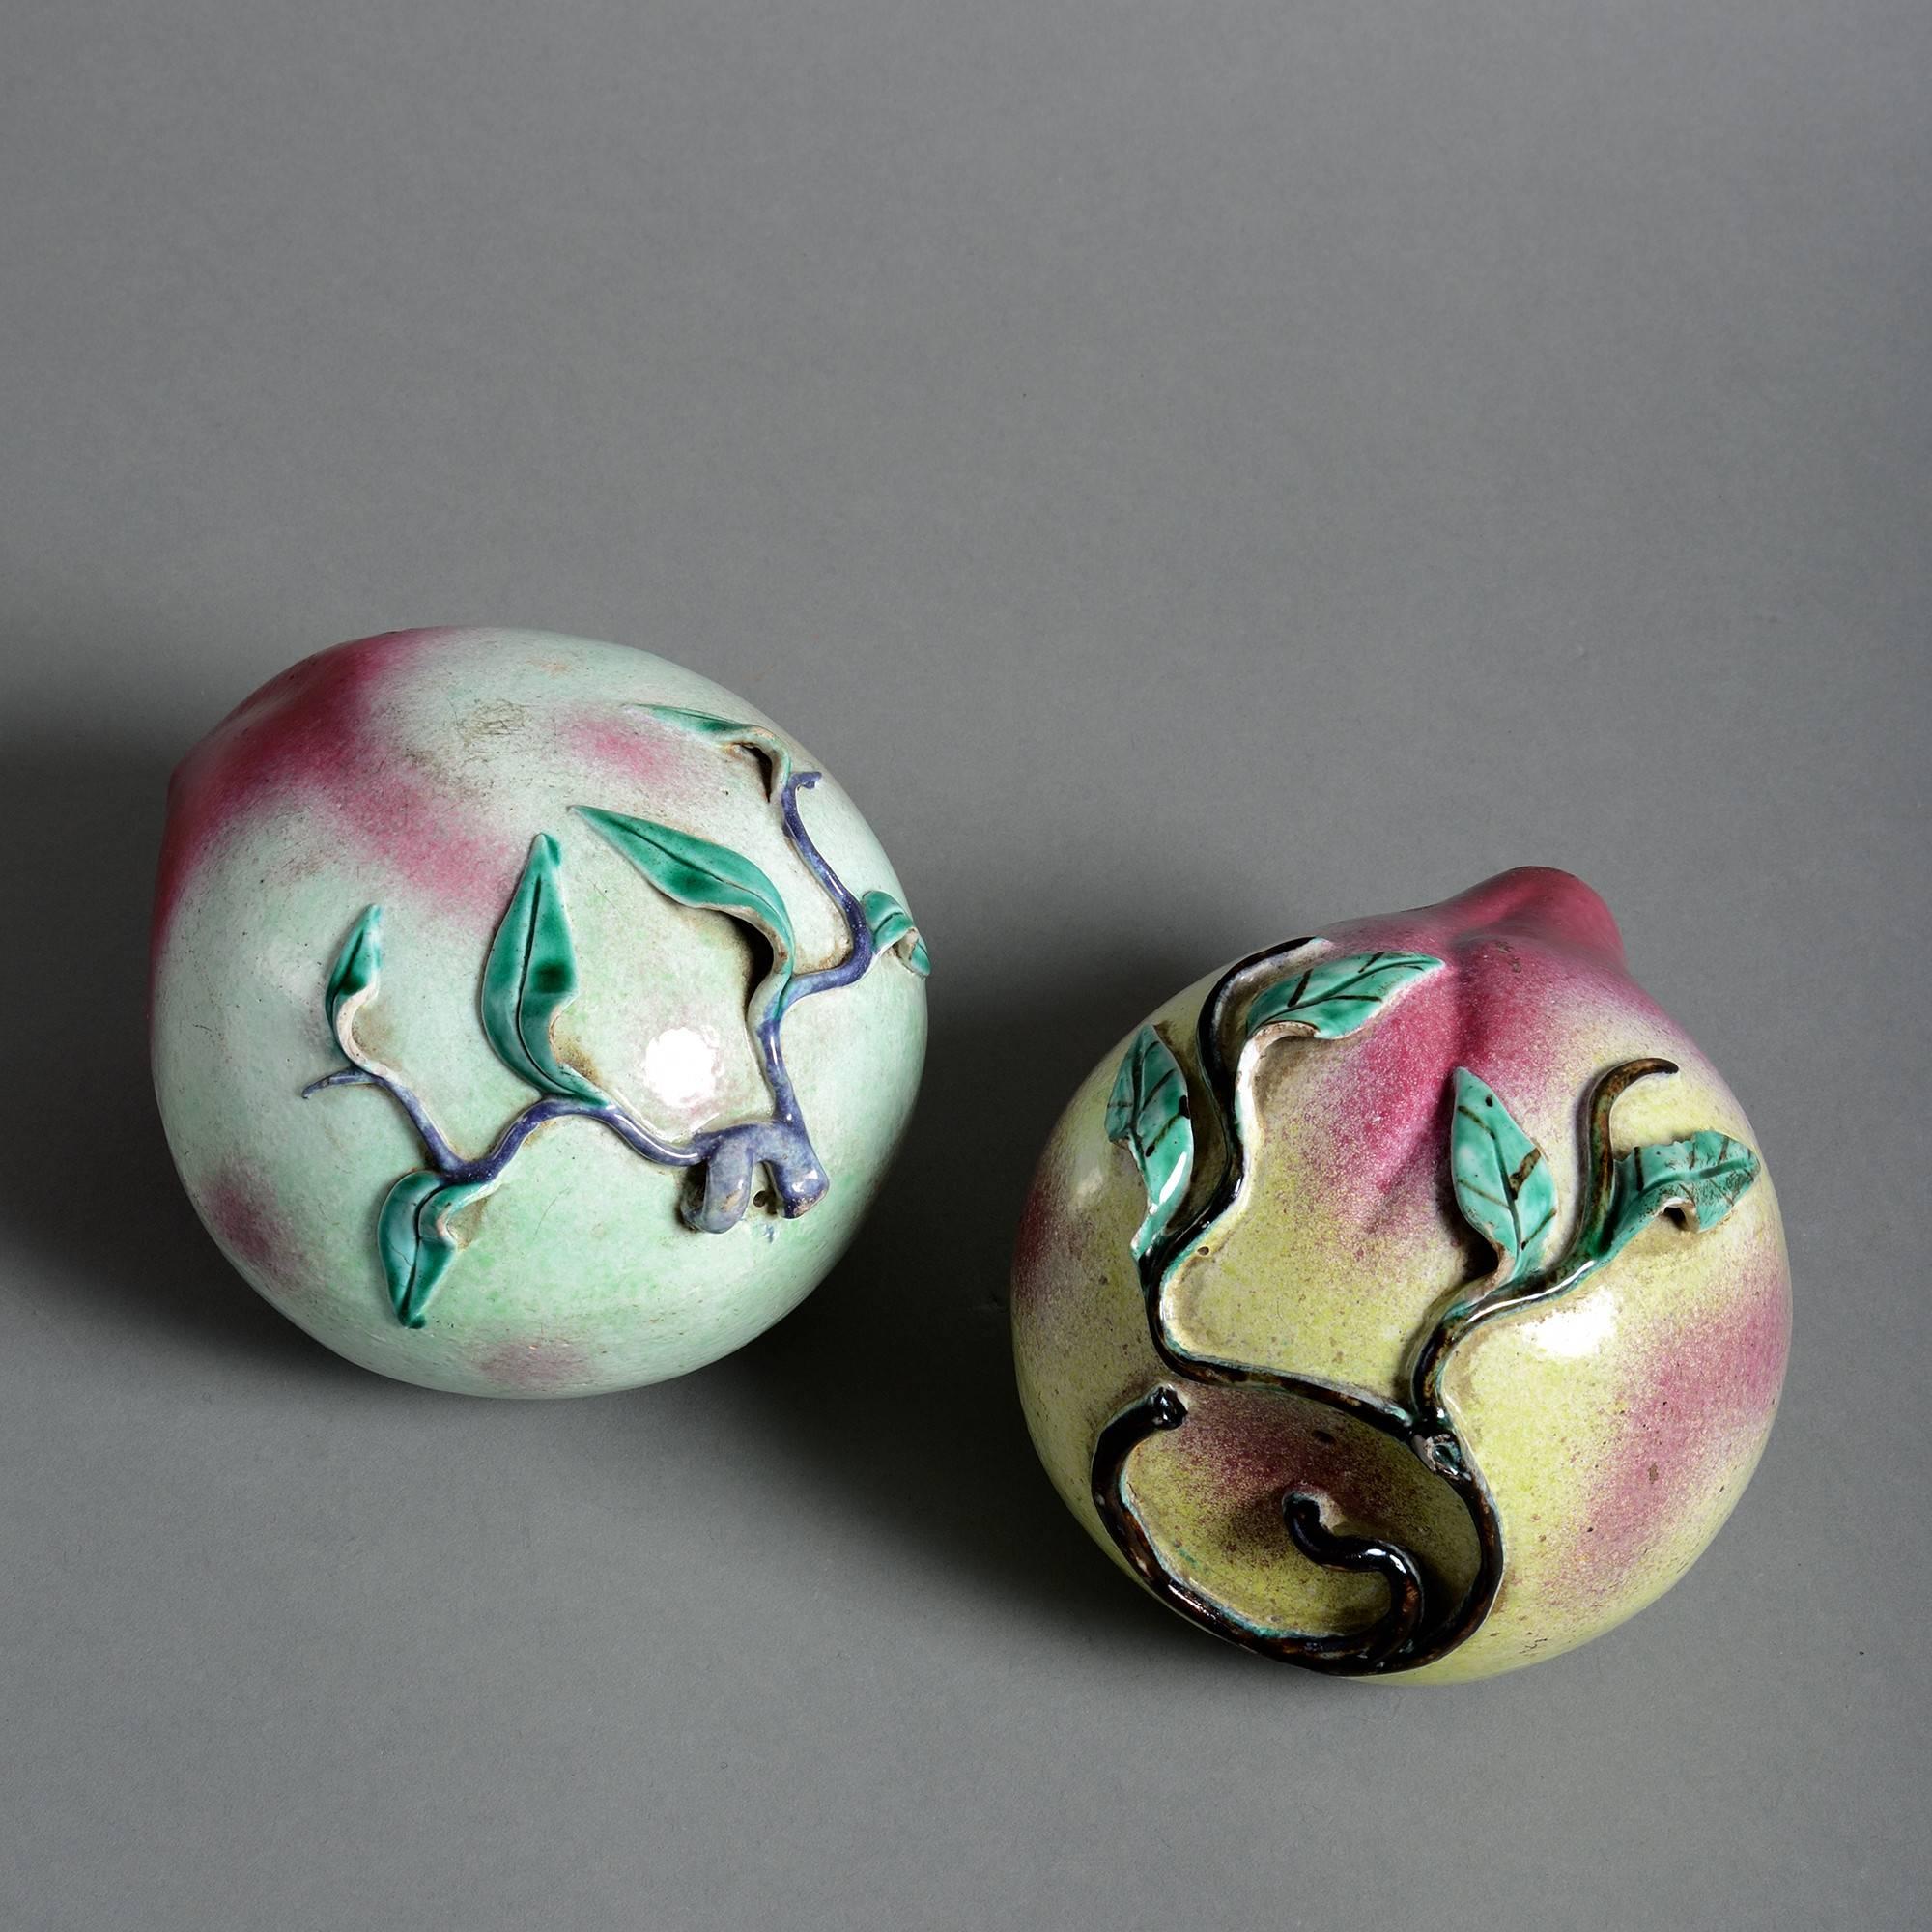 Two late 19th century porcelain peaches, with brilliant pink and green glazes and naturally modelled leaves. 

Qing dynasty, Guangxu period.

Condition: Some old chips to leaves.